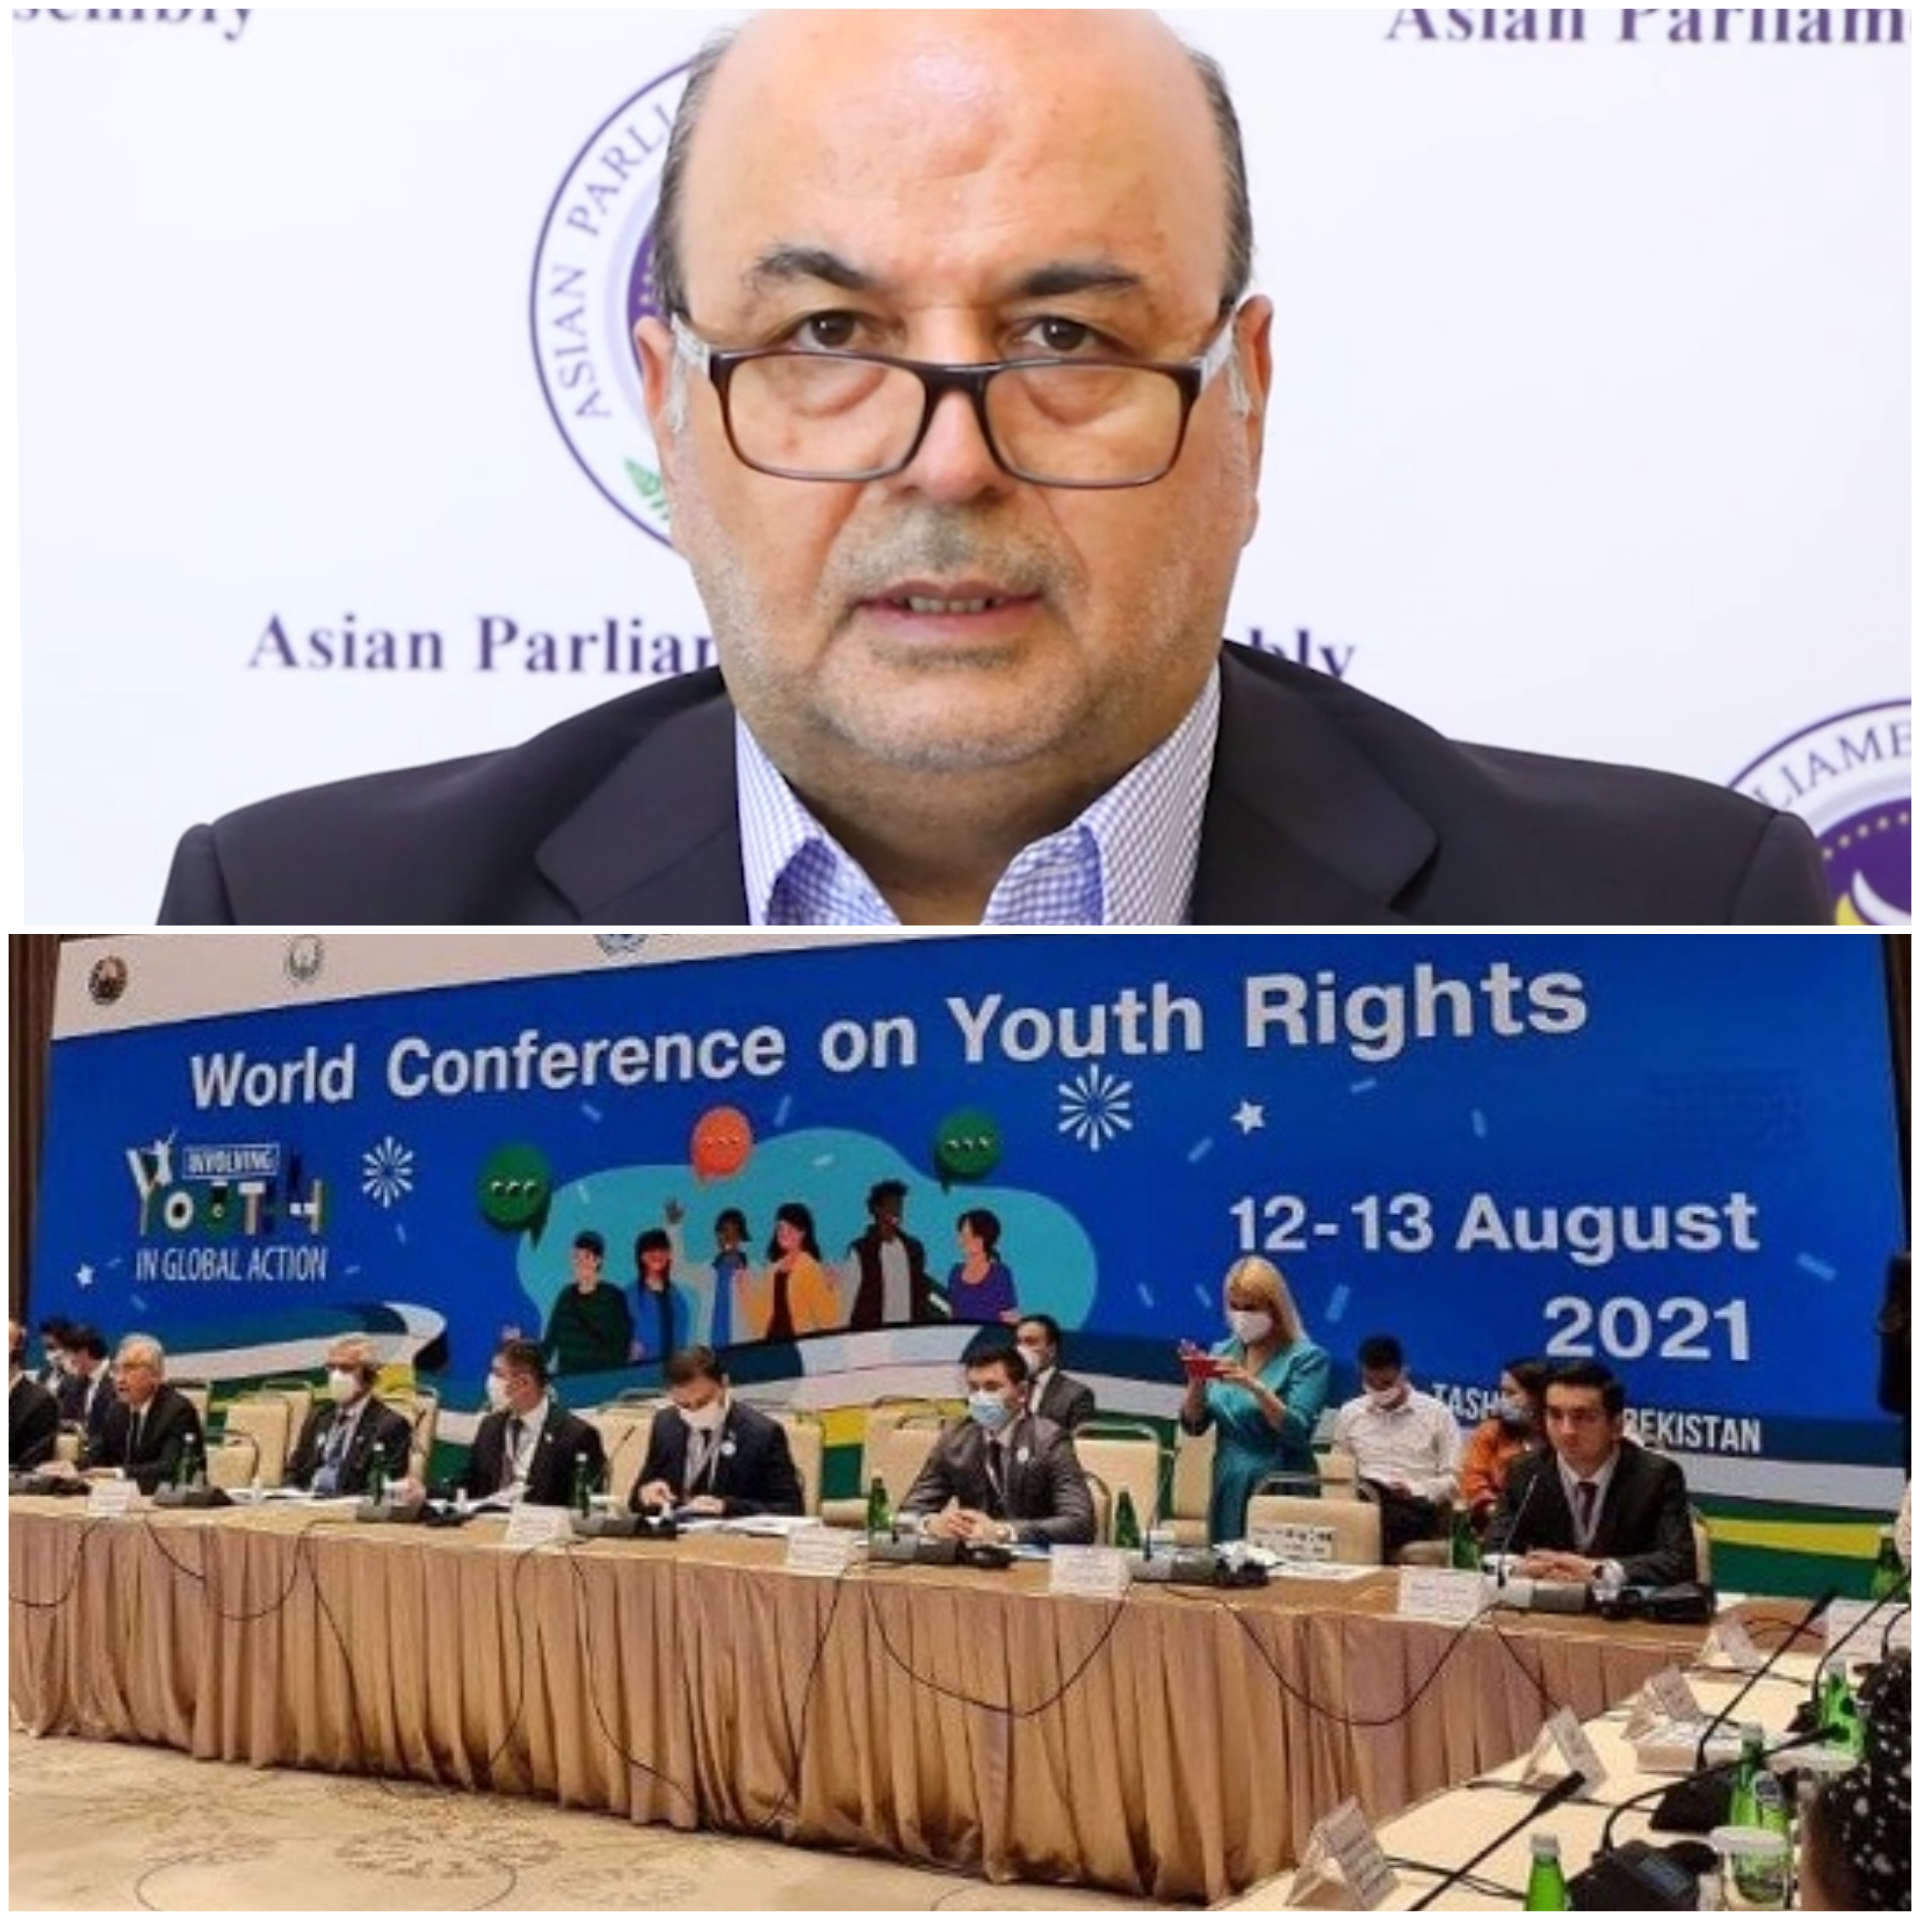 APA Secretary General’s Address at  The World Conference on Youth Rights "Engaging Youth in Global Action" 